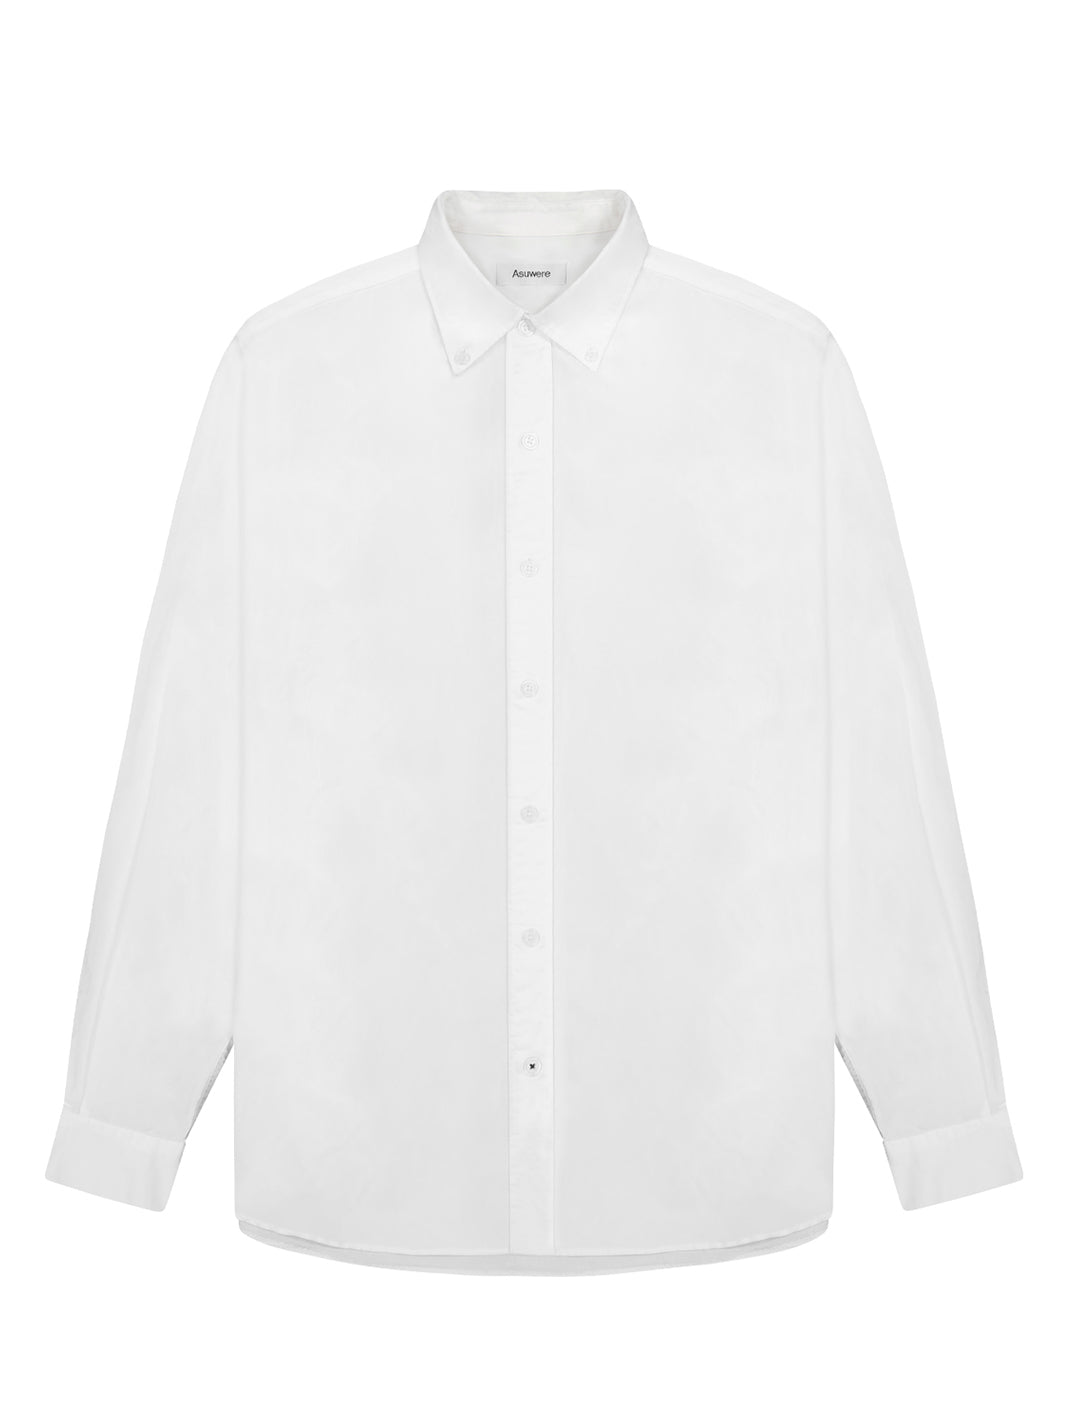 Front of white poplin button down shirt against white background